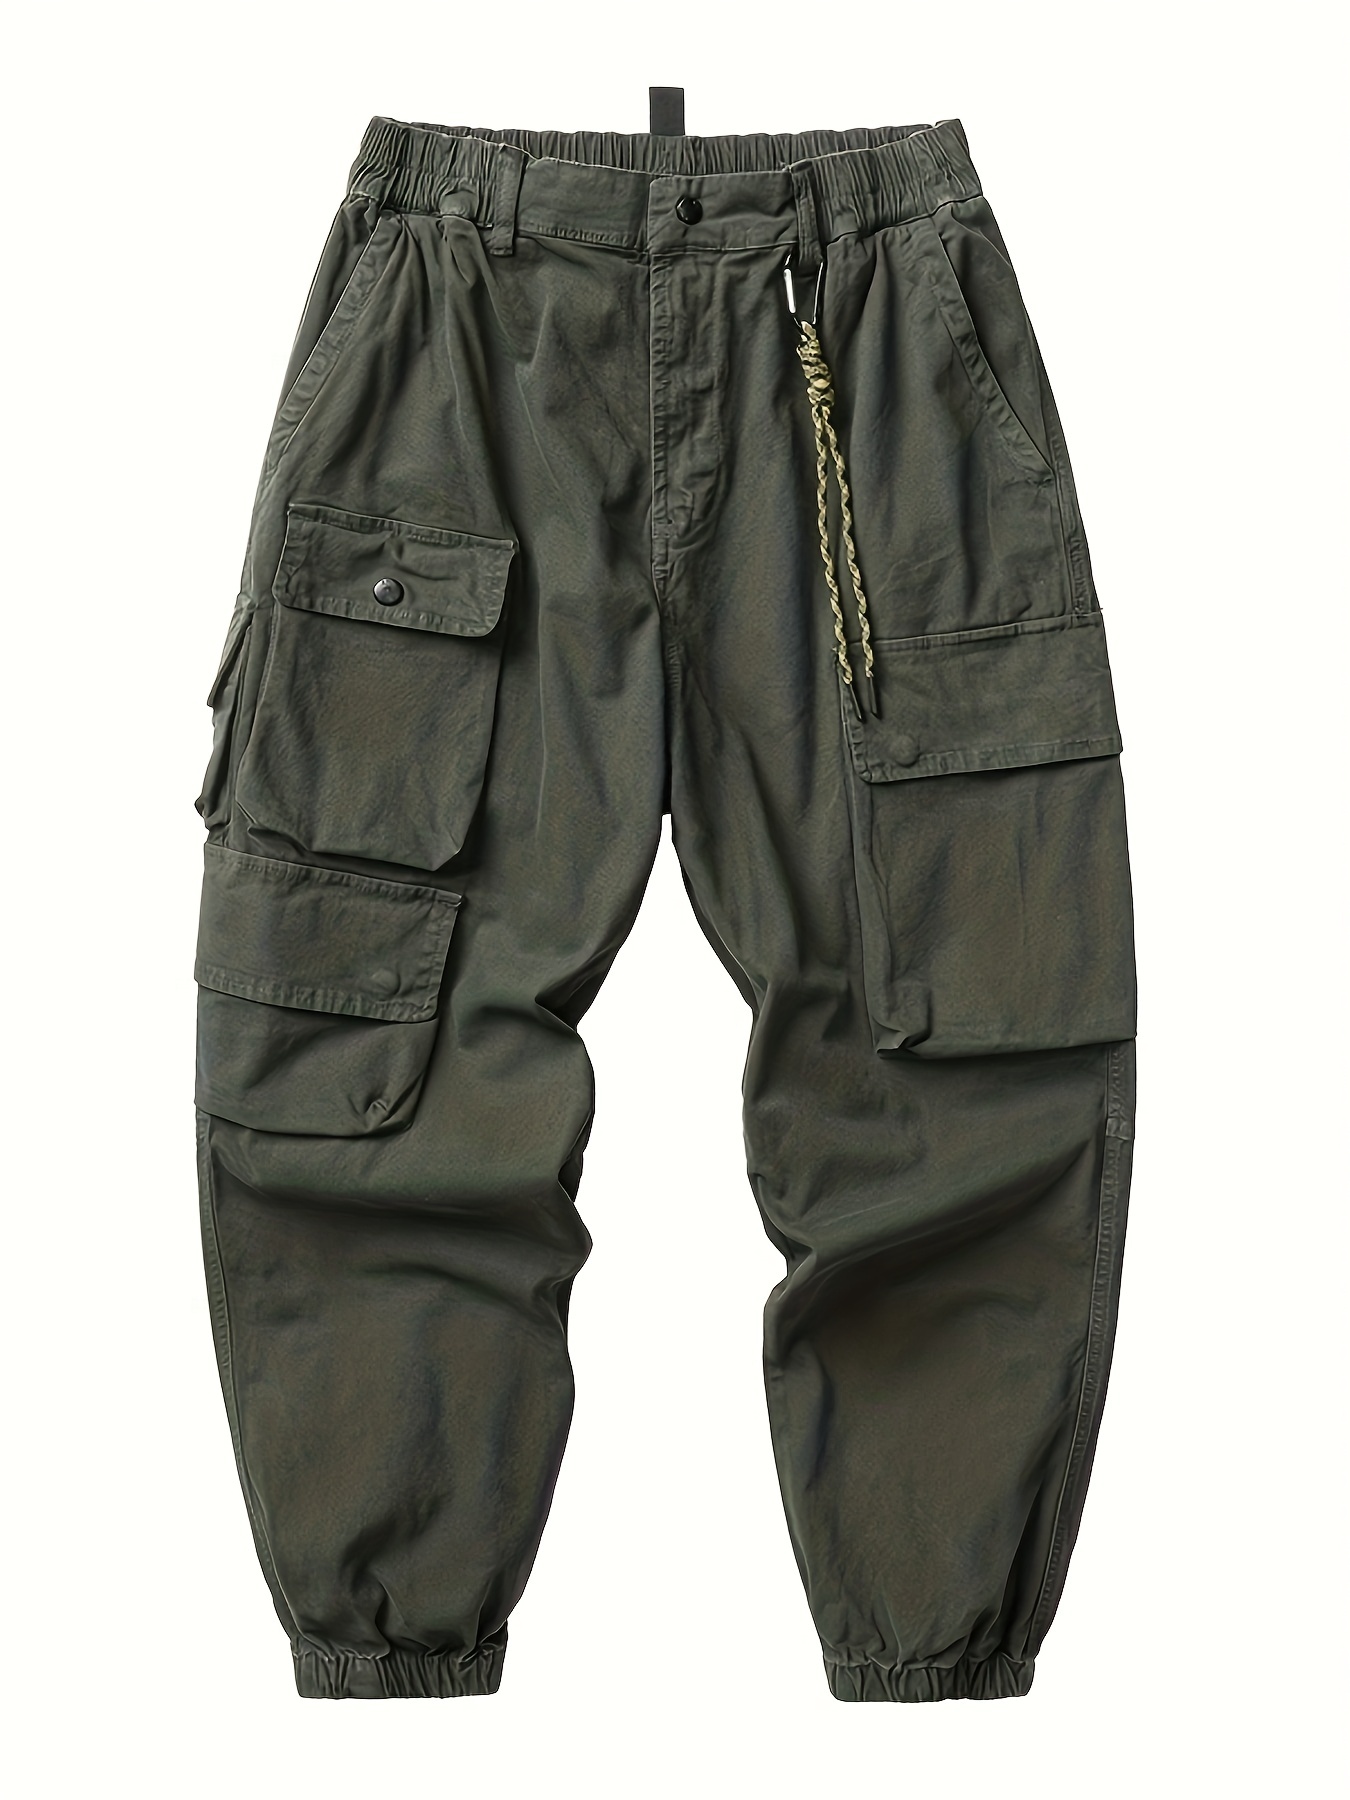 Men's Cargo Pants with Multiple Pockets - Comfortable and Durable Outdoor  Trousers for Work and Streetwear